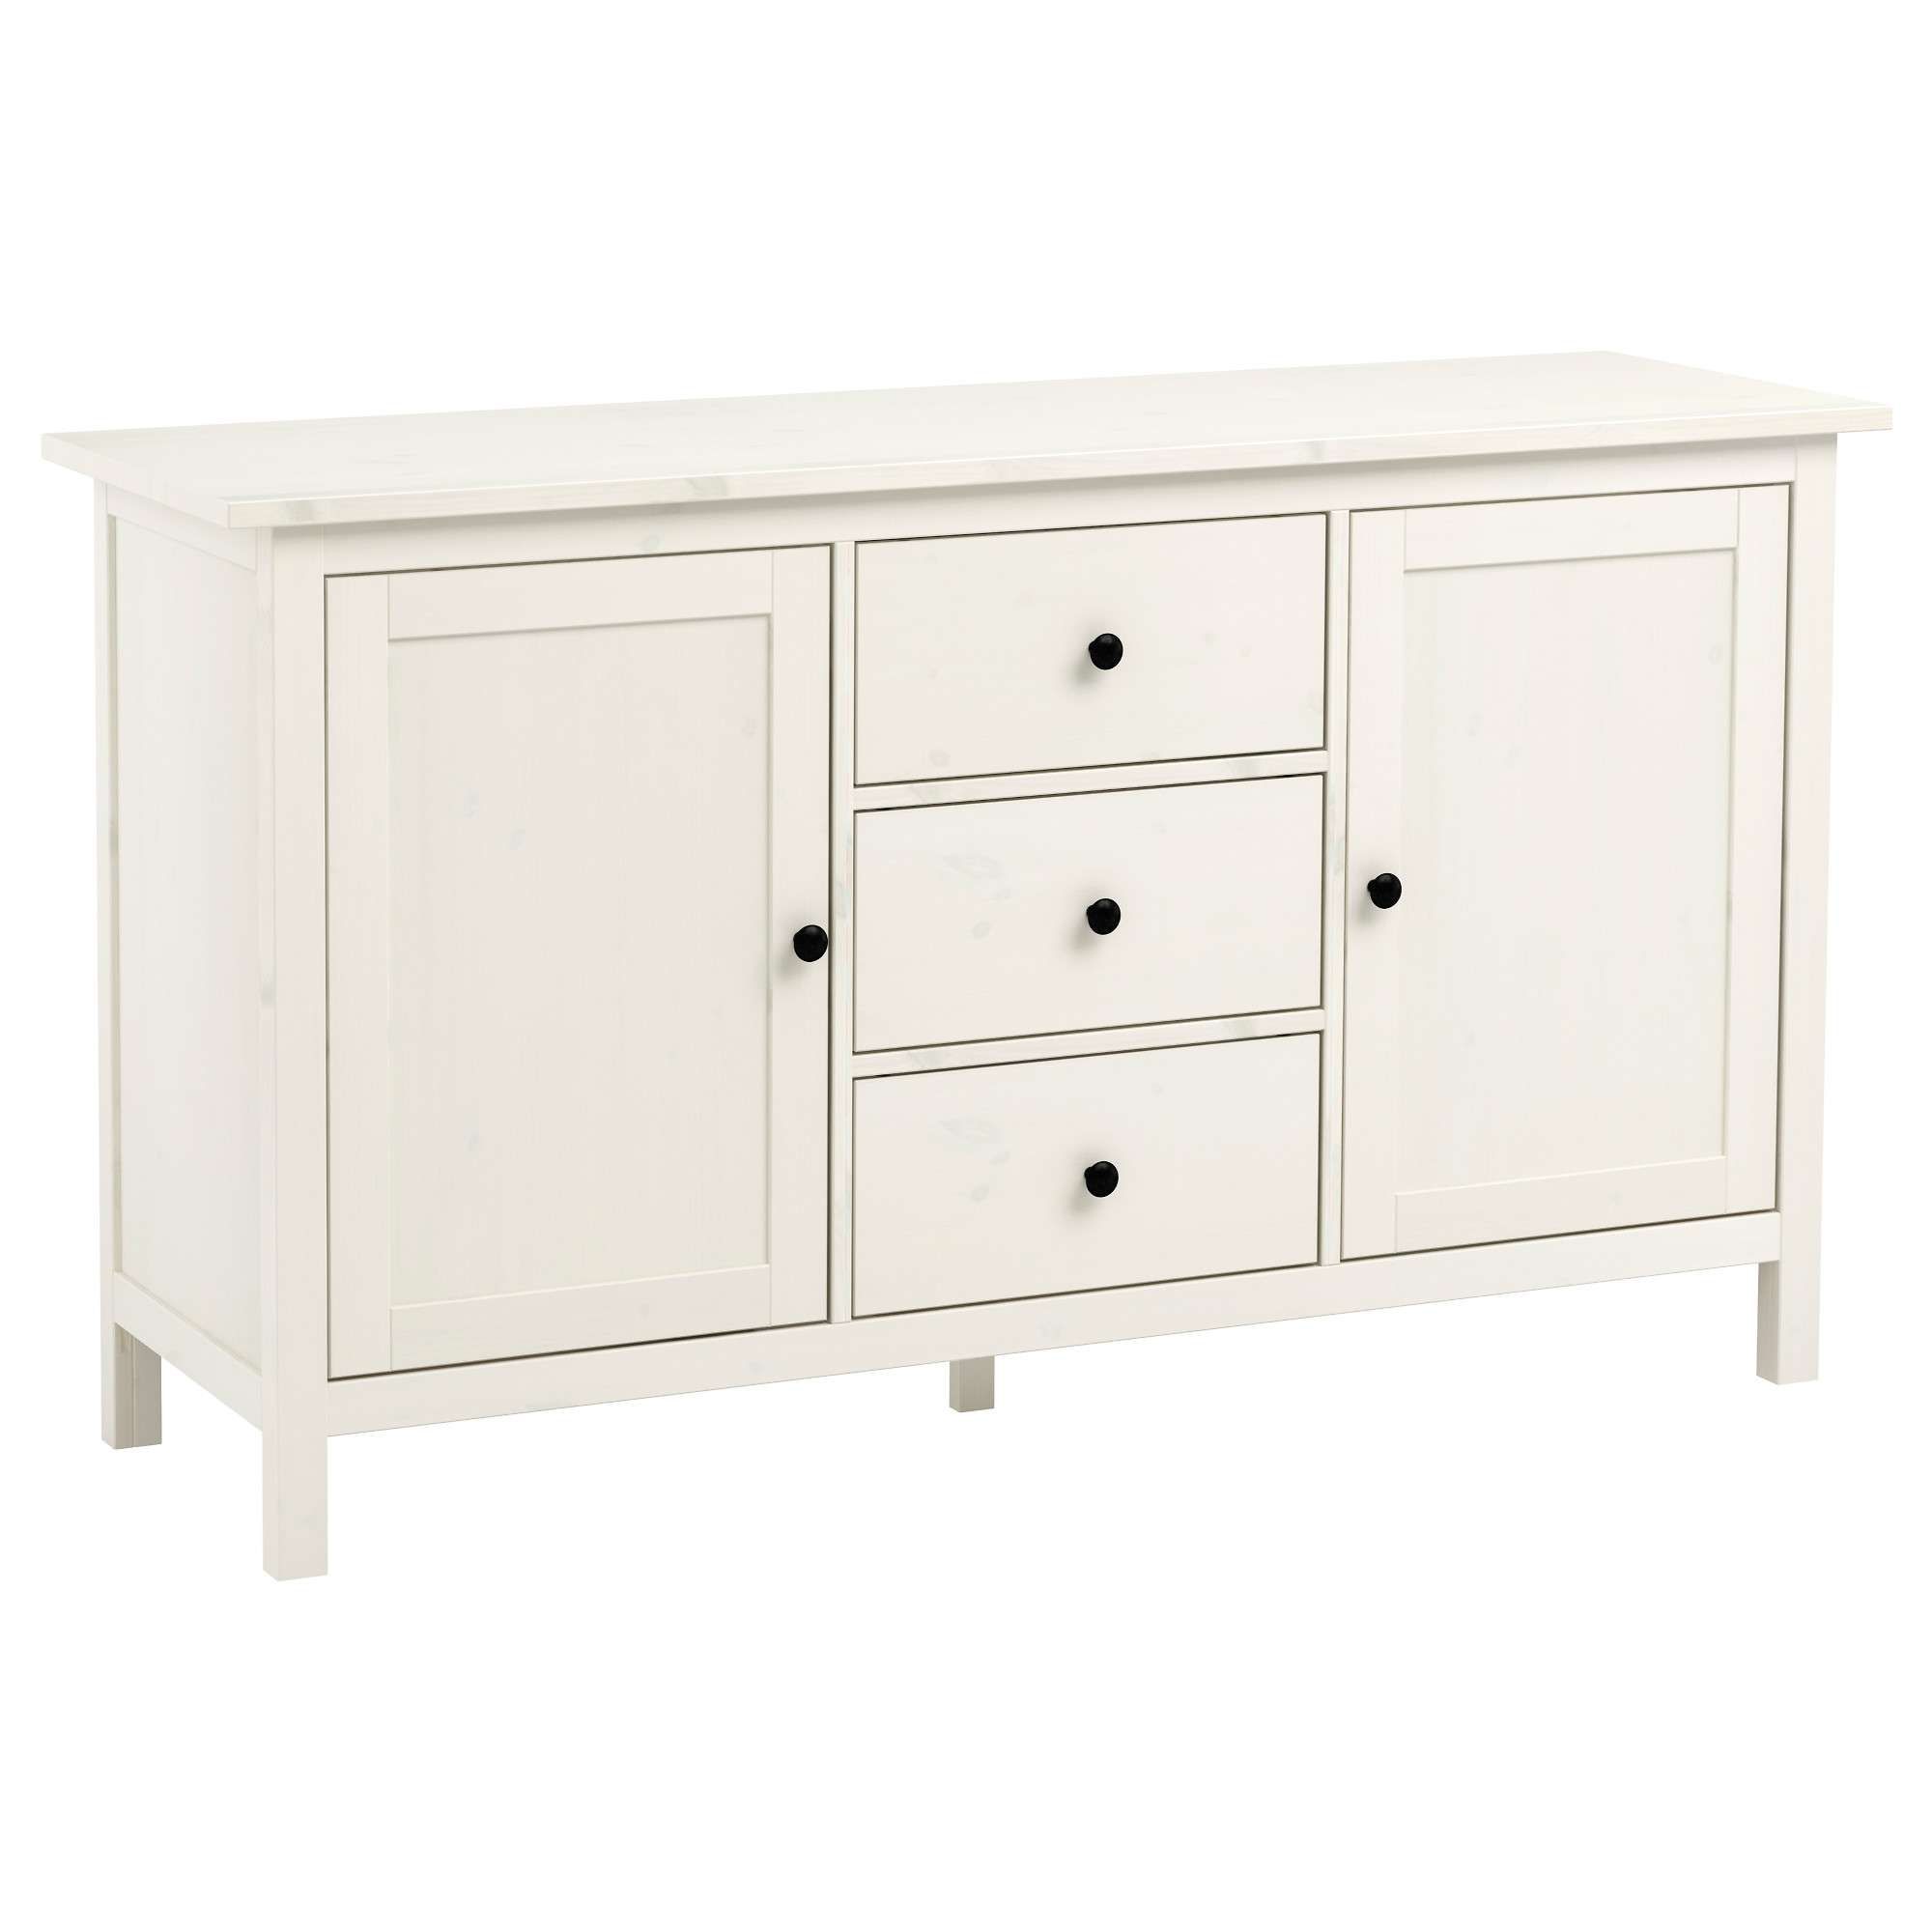 Hemnes Sideboard – White Stain – Ikea With Deep Sideboards (View 2 of 20)